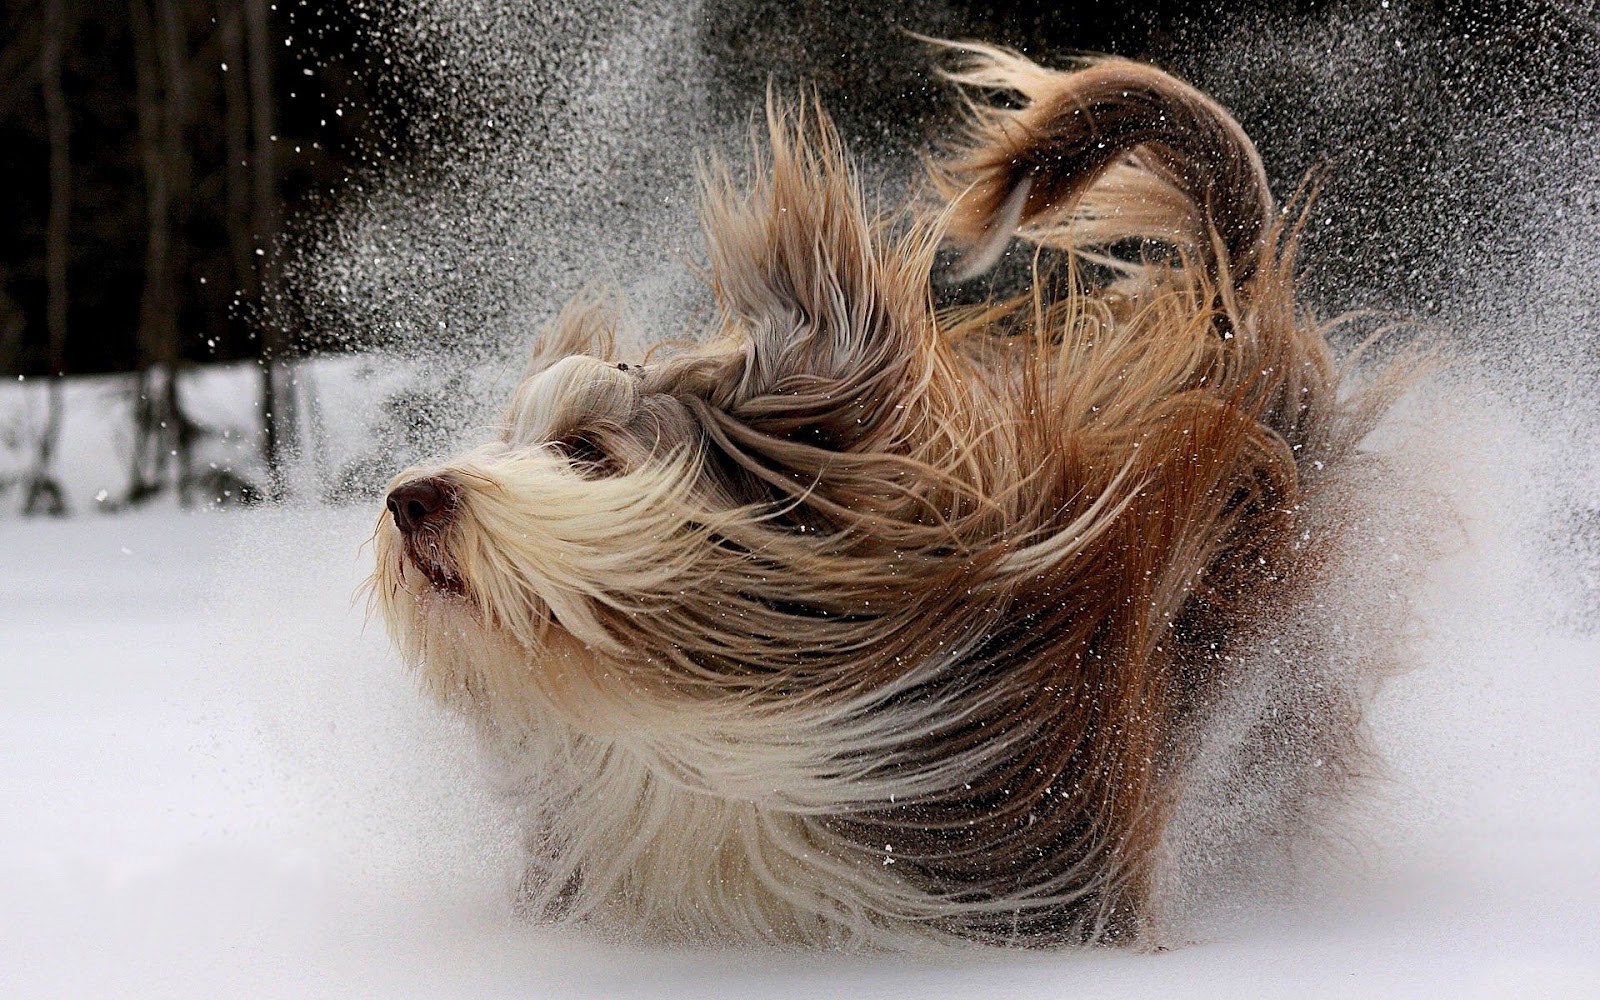 dog-playing-in-the-snow-hd-animal-wallpaper_1.jpg